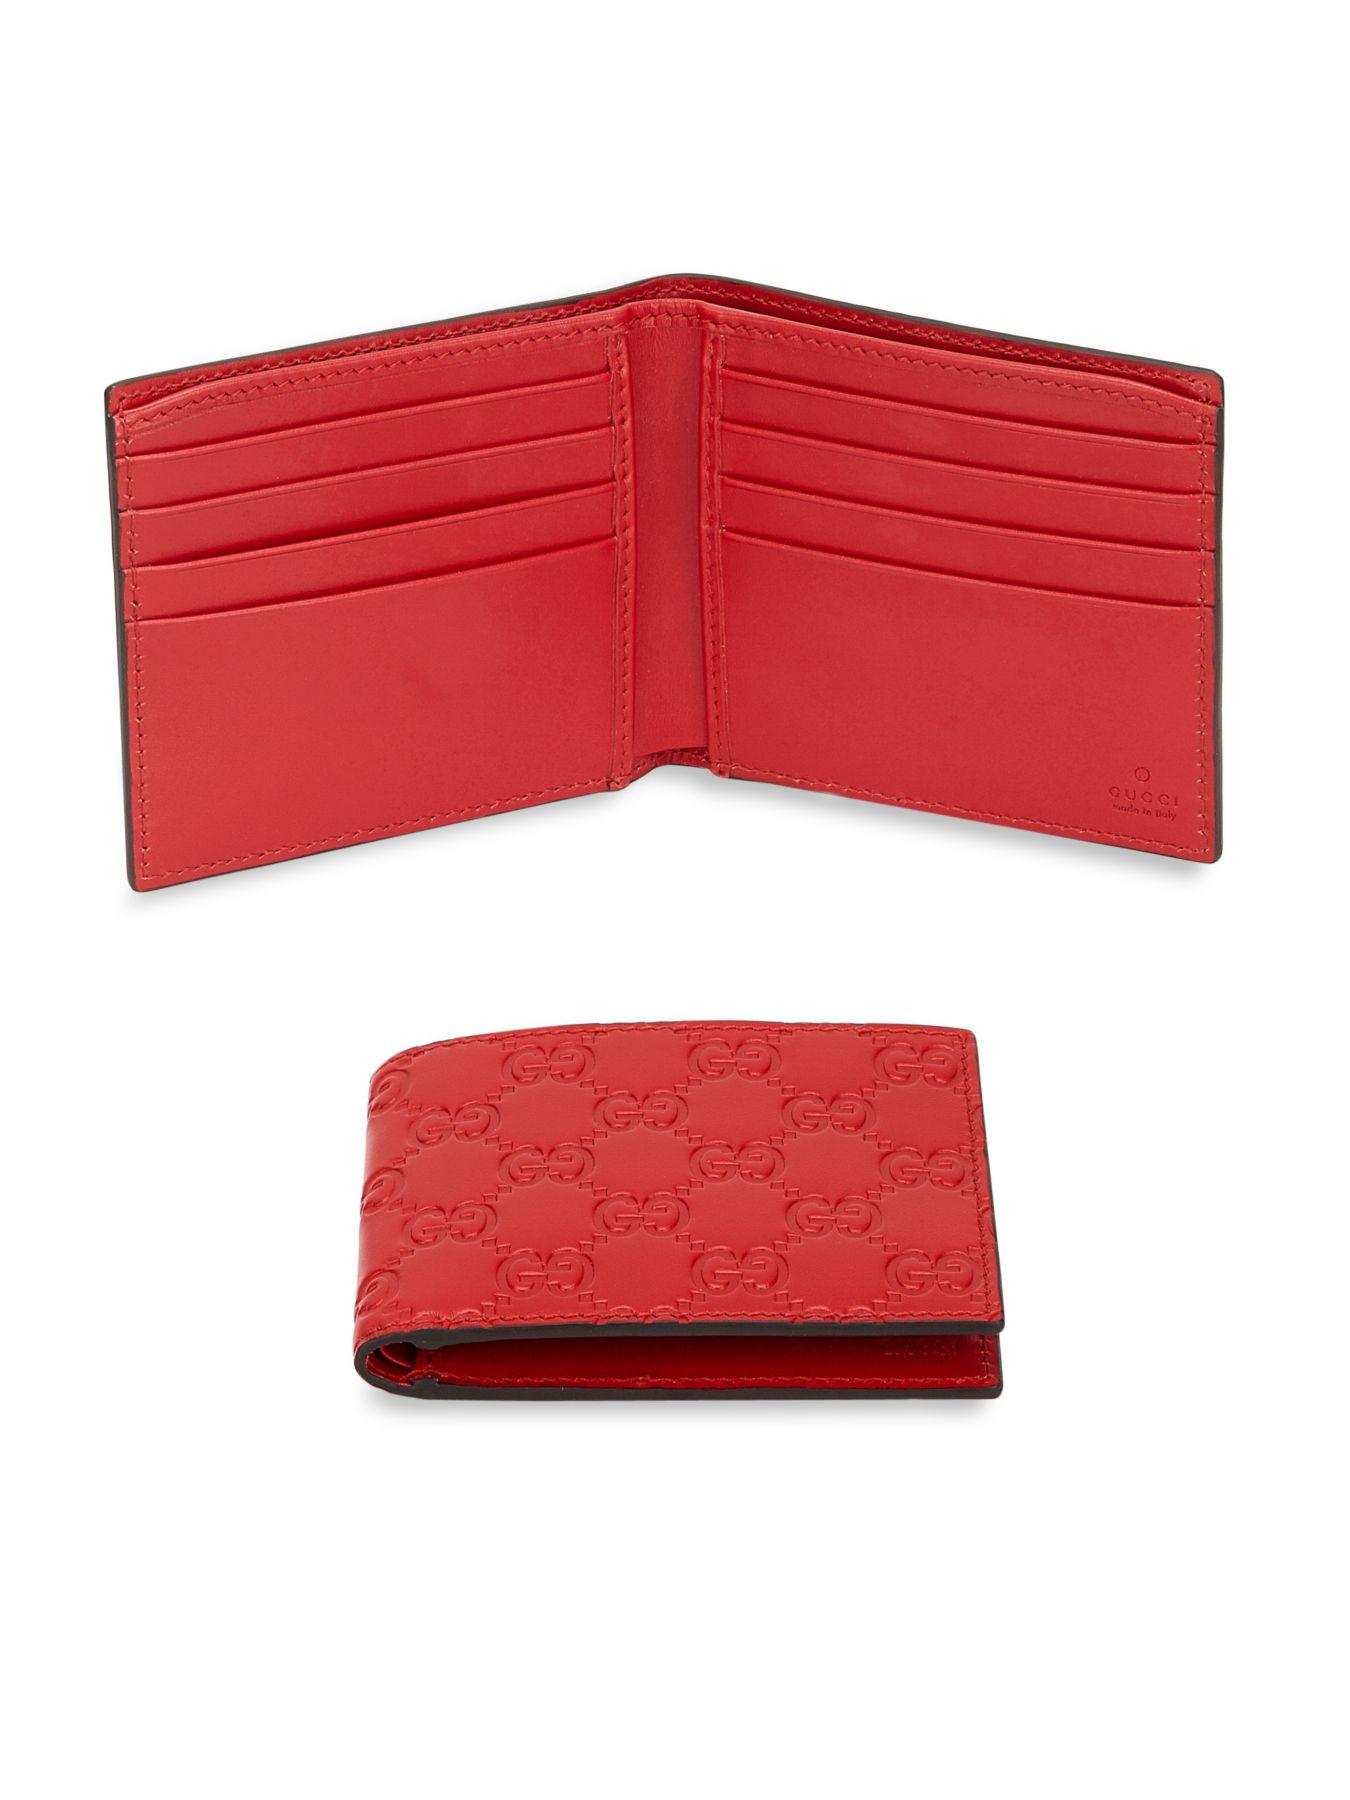 Gucci Leather Signature Wallet in Red for Men - Lyst